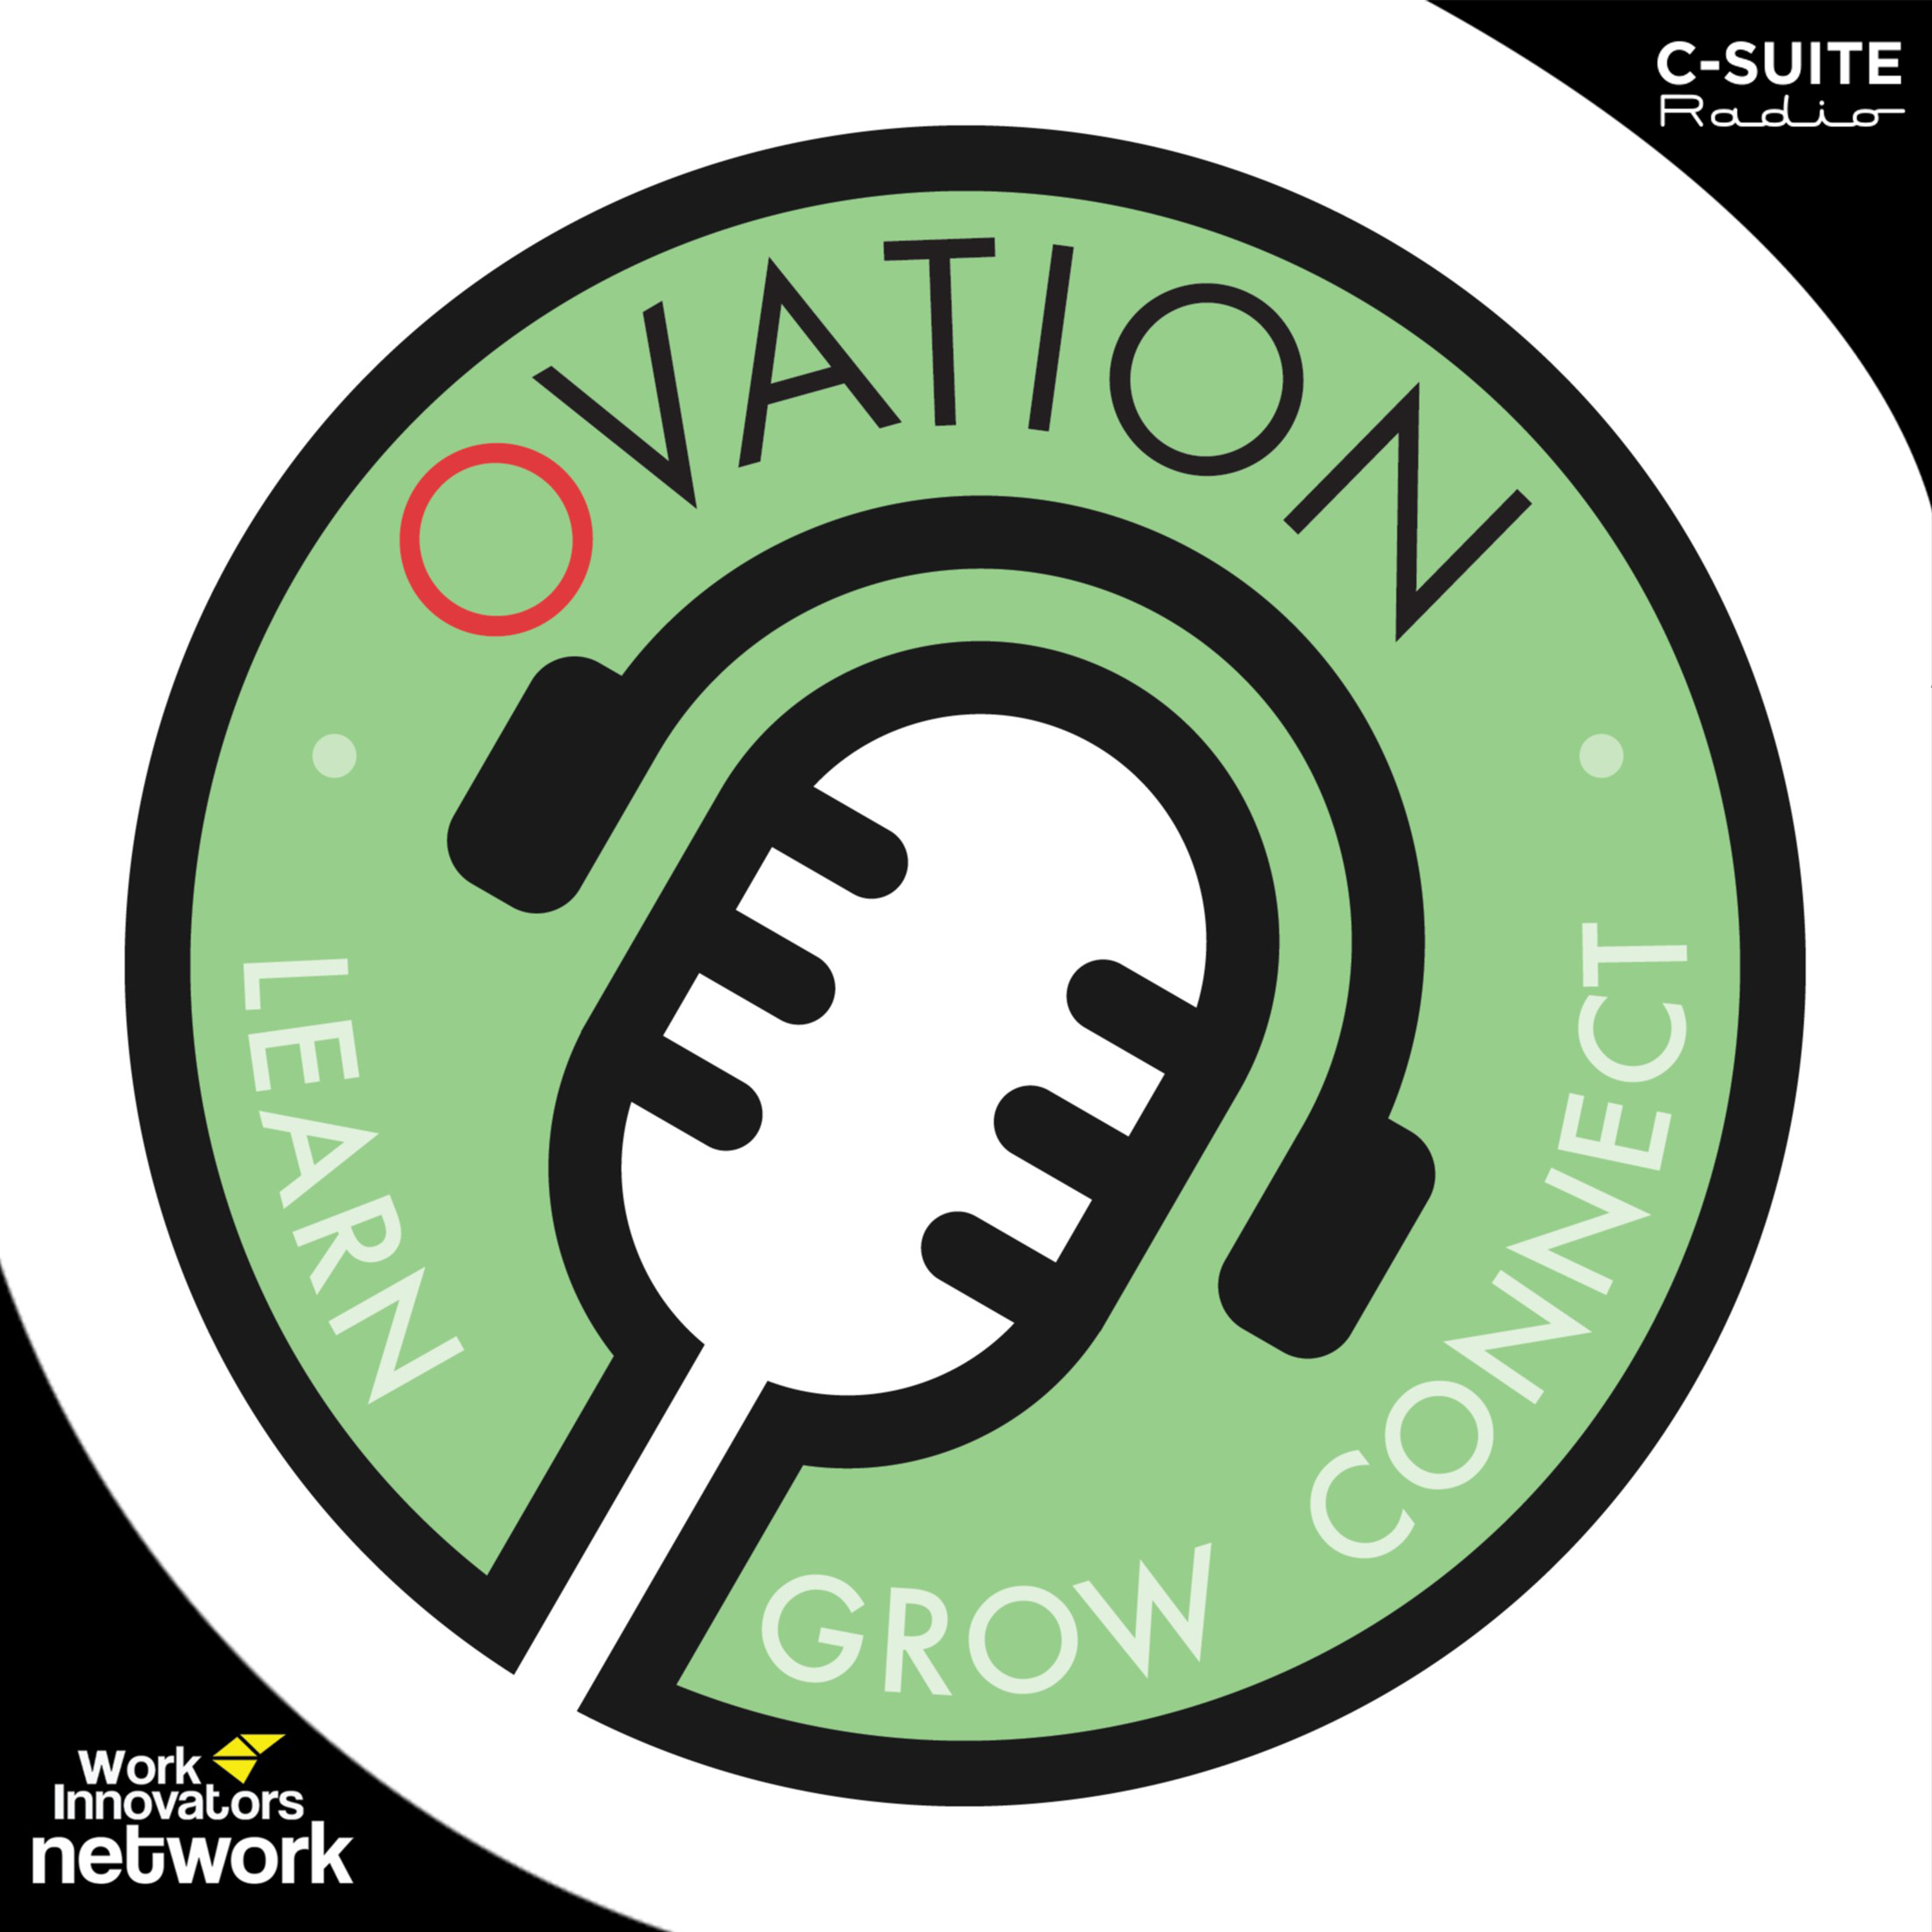 The Ovation Show w/ Dan LaBroad